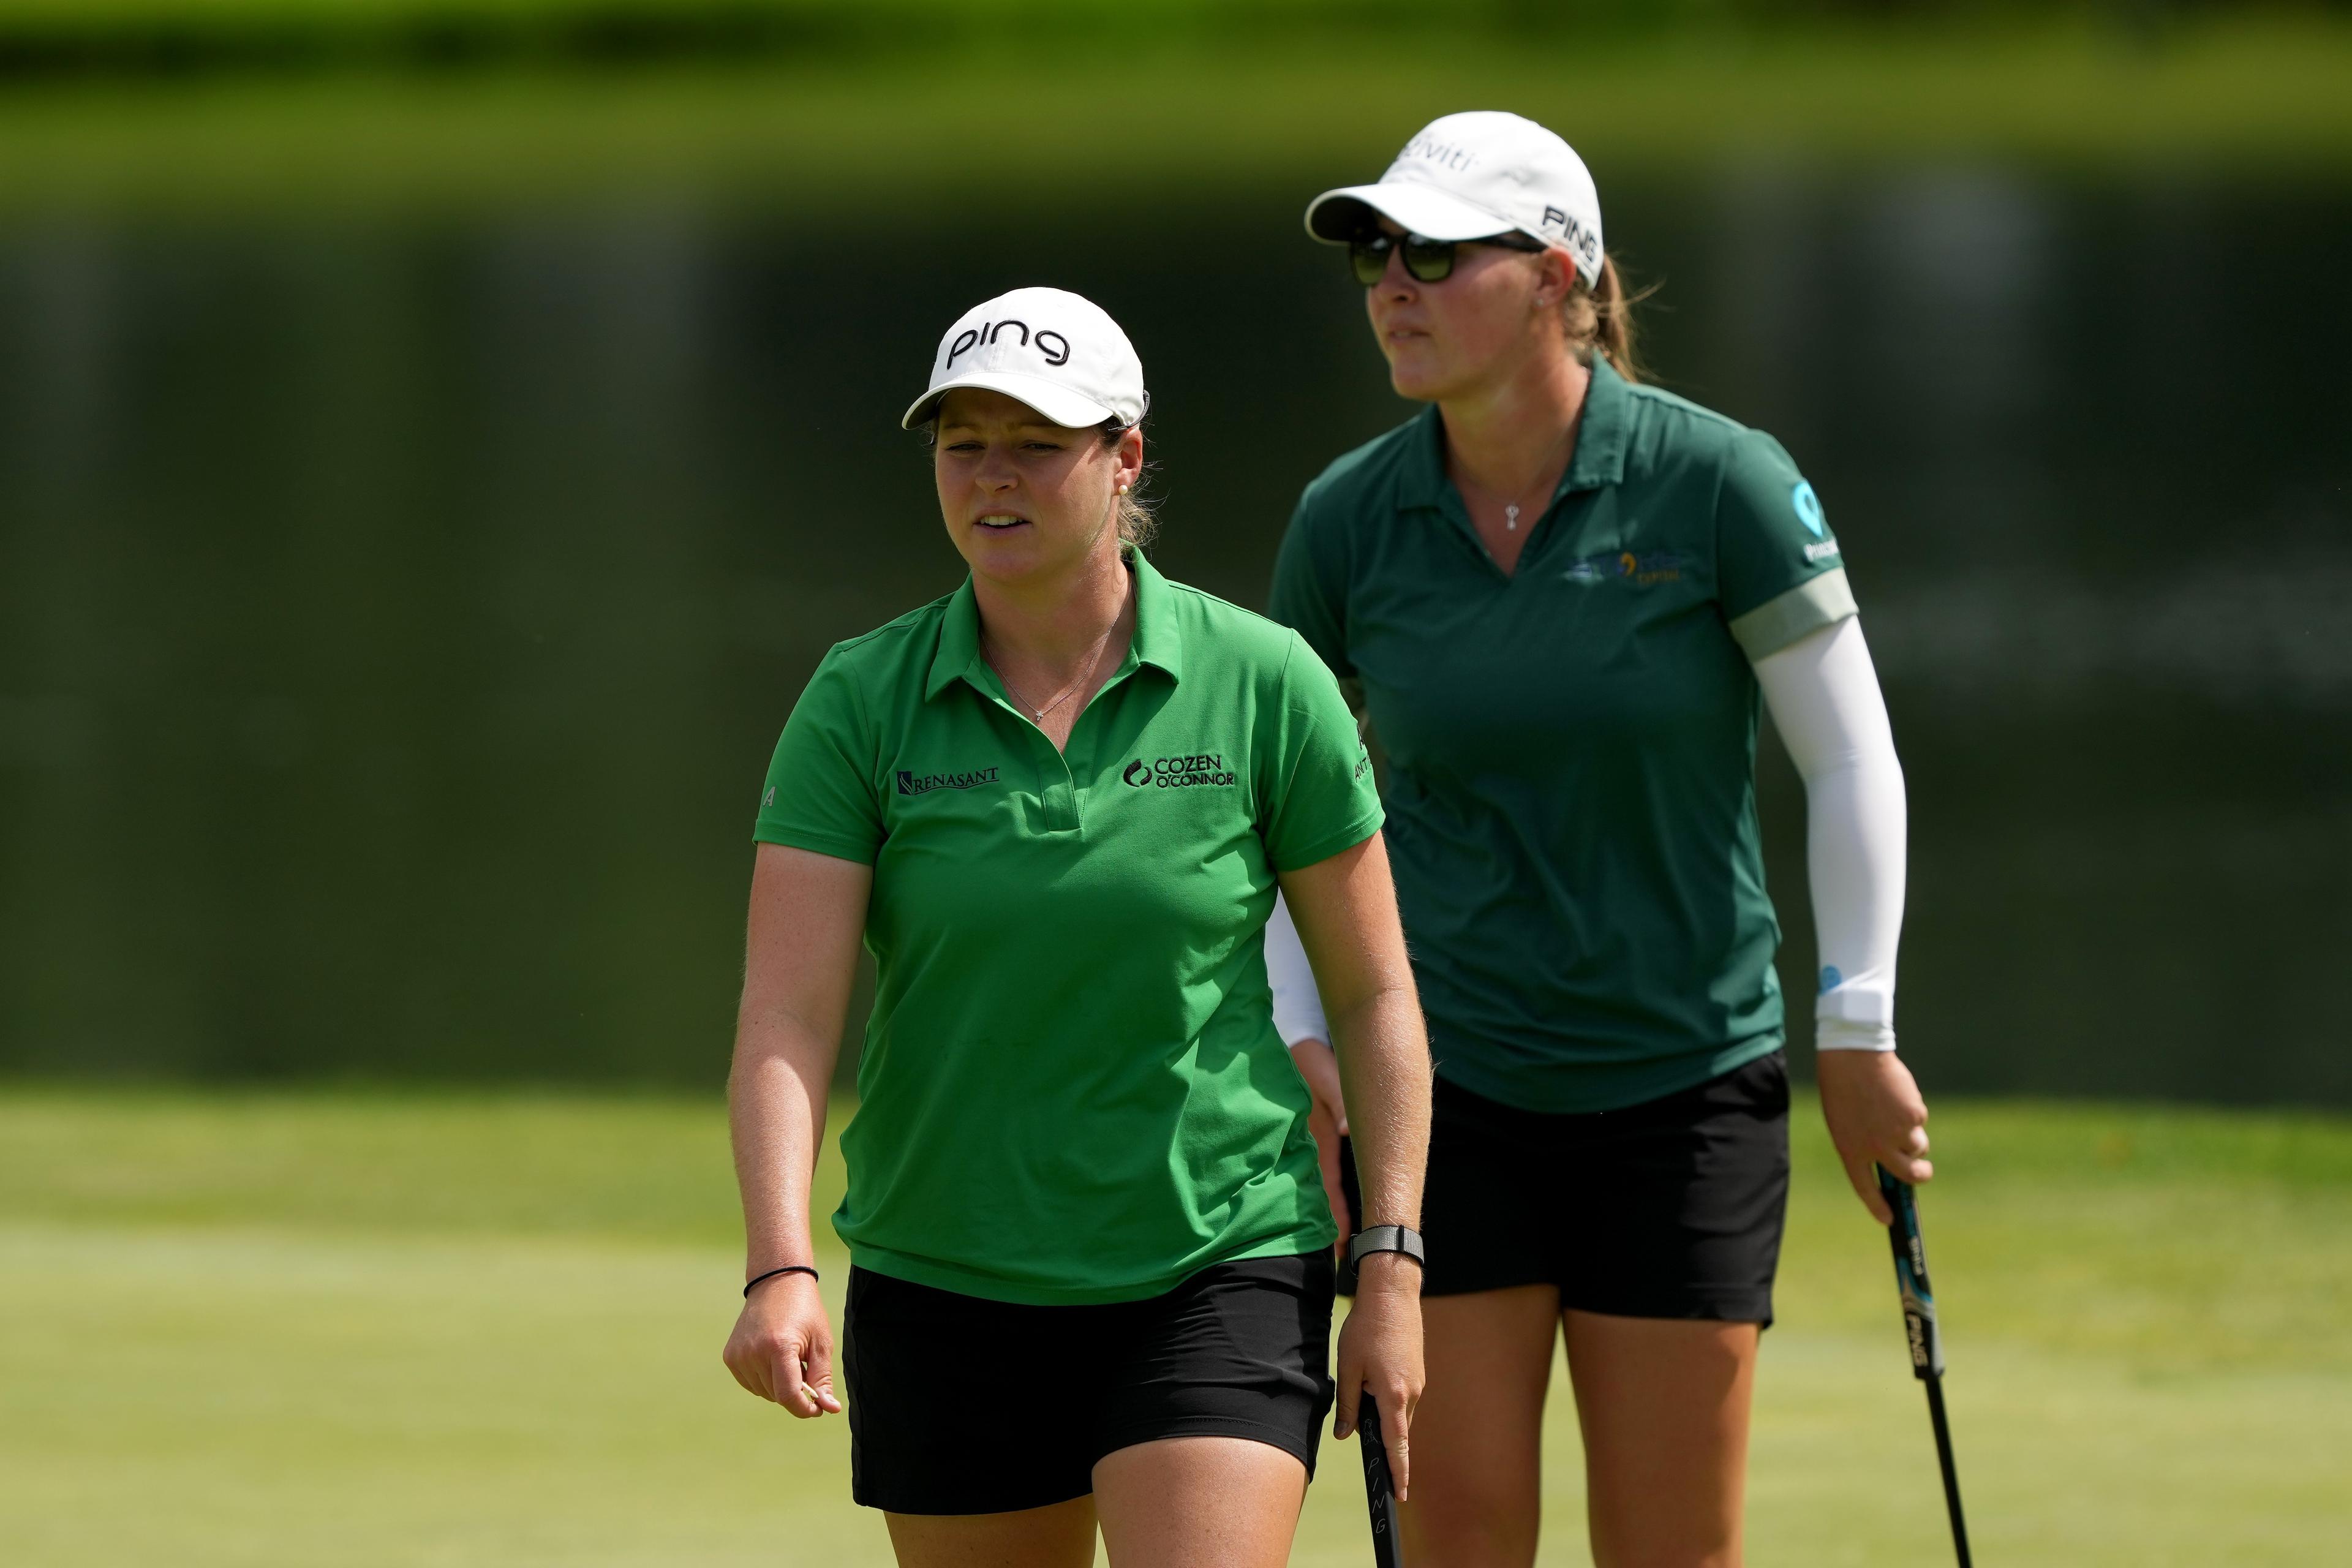 American Duo of Ewing and Kupcho Take Lead Into Final Round of Dow Championship